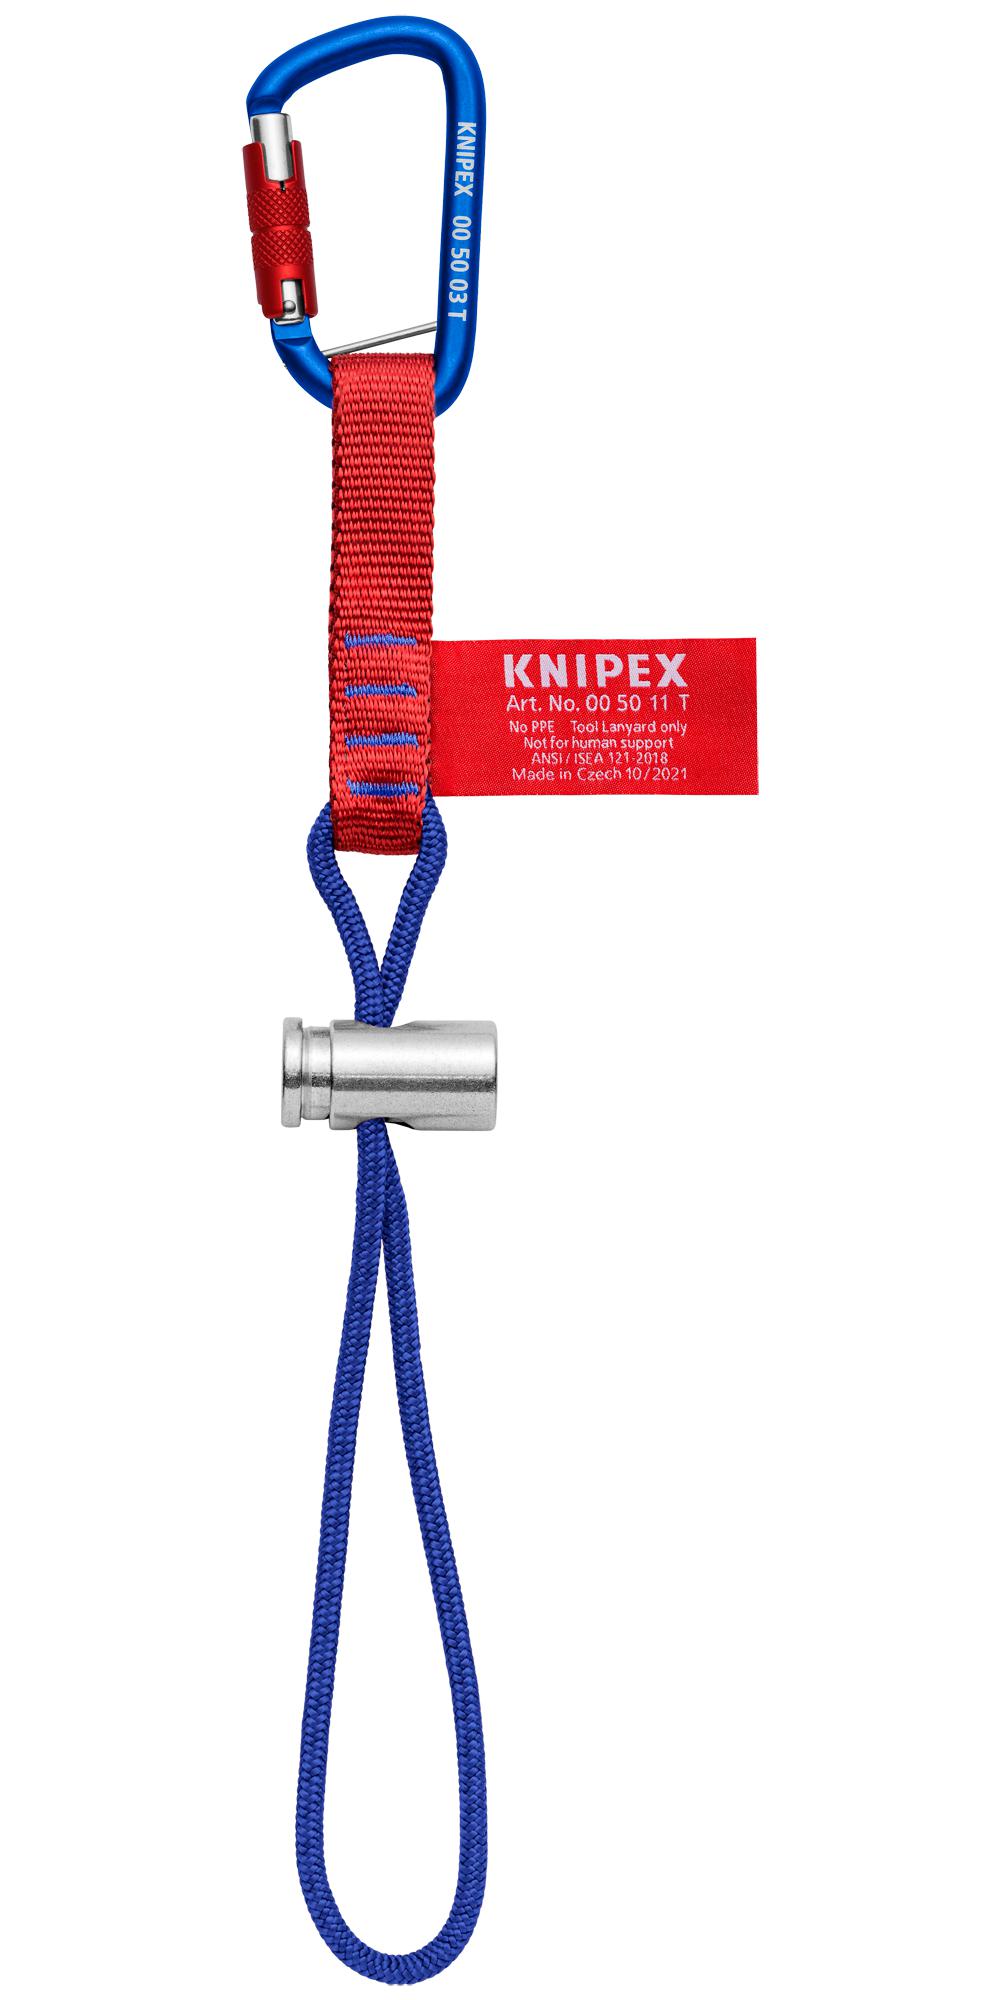 Knipex 00 50 13 T Bk Adapter Strap W/carabiner, Tethered Tool